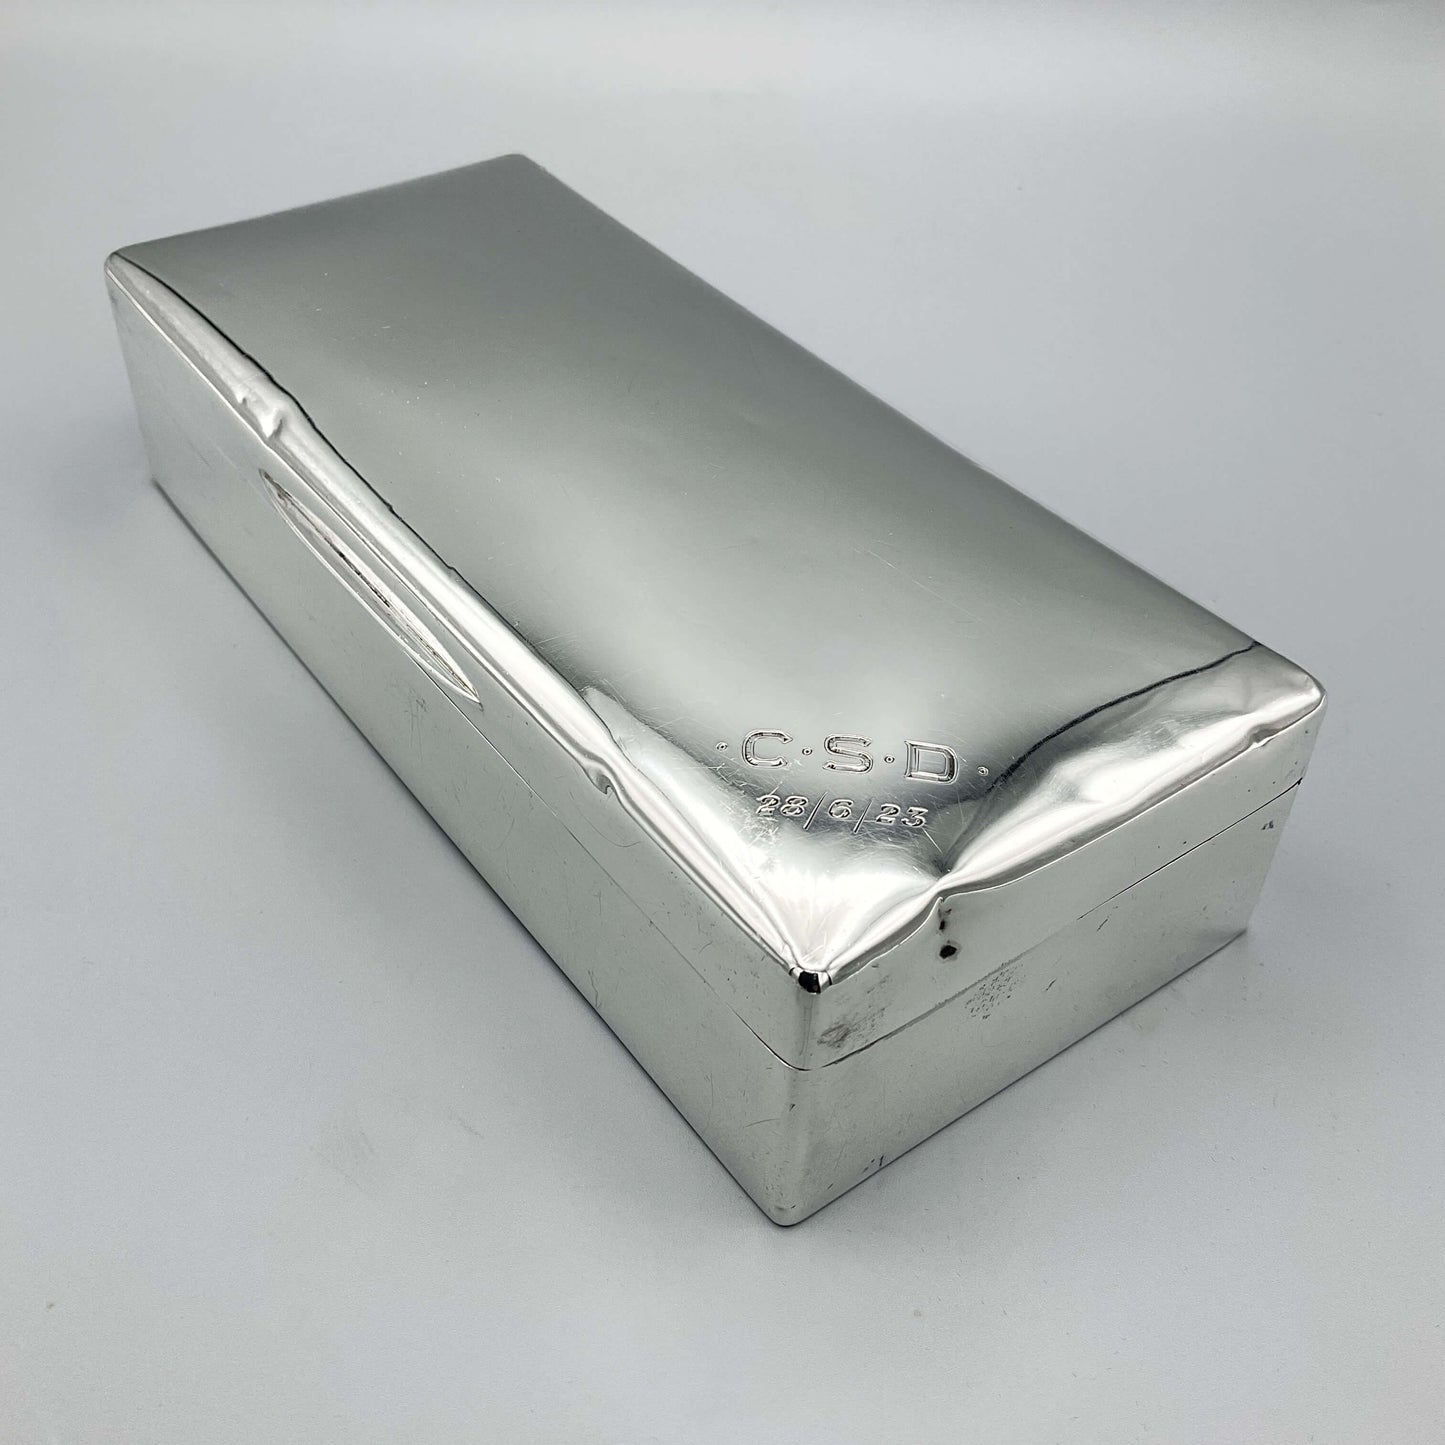 shiny silver rectangular cigarette box showing a corner with CSD engraved and 28/6/23